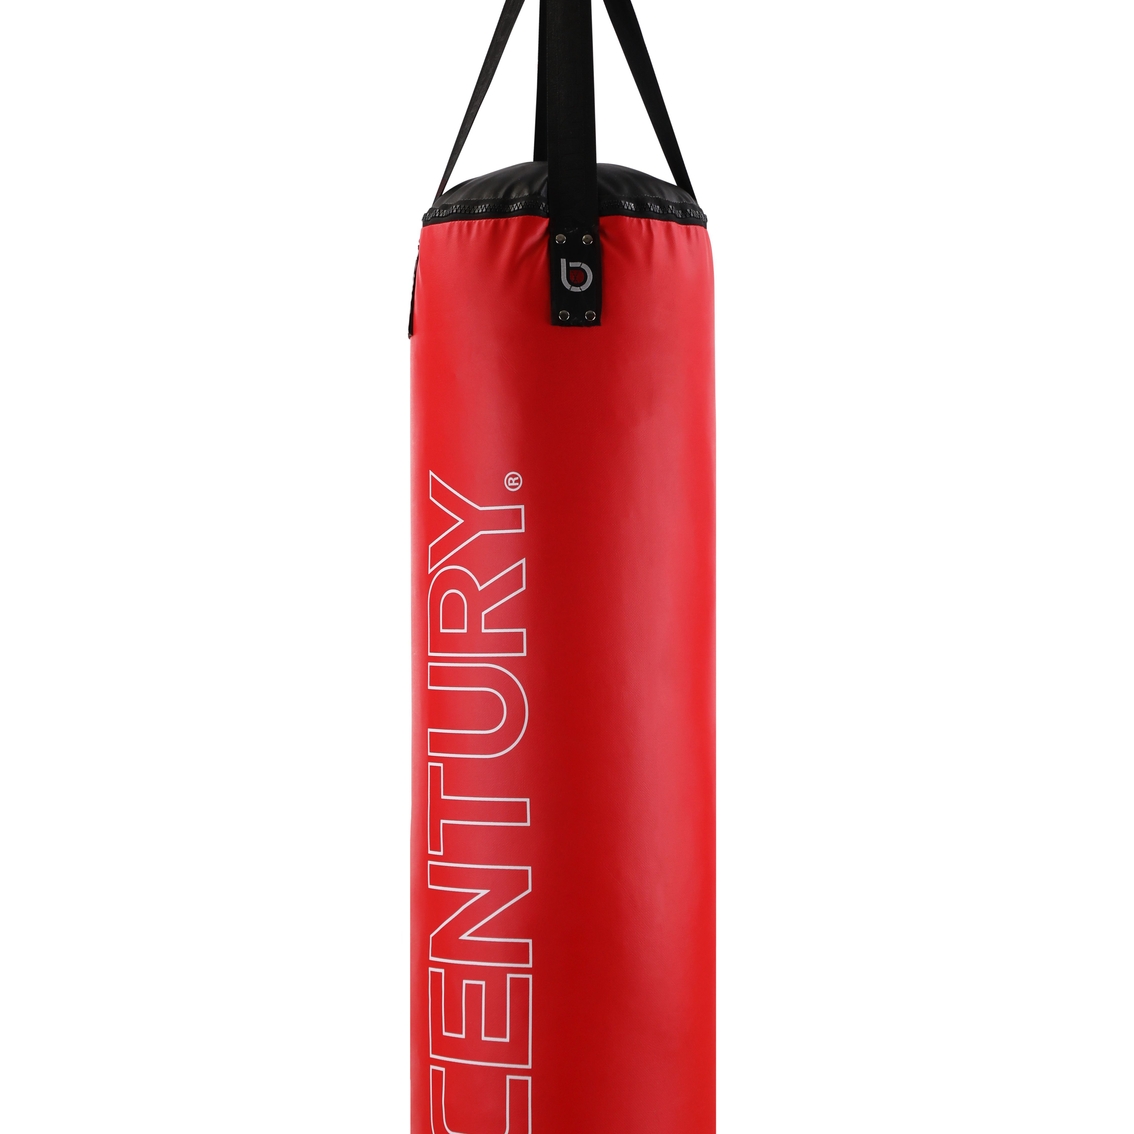 Brave 4.0 Heavy Bag 100 lbs - Image 1 of 2